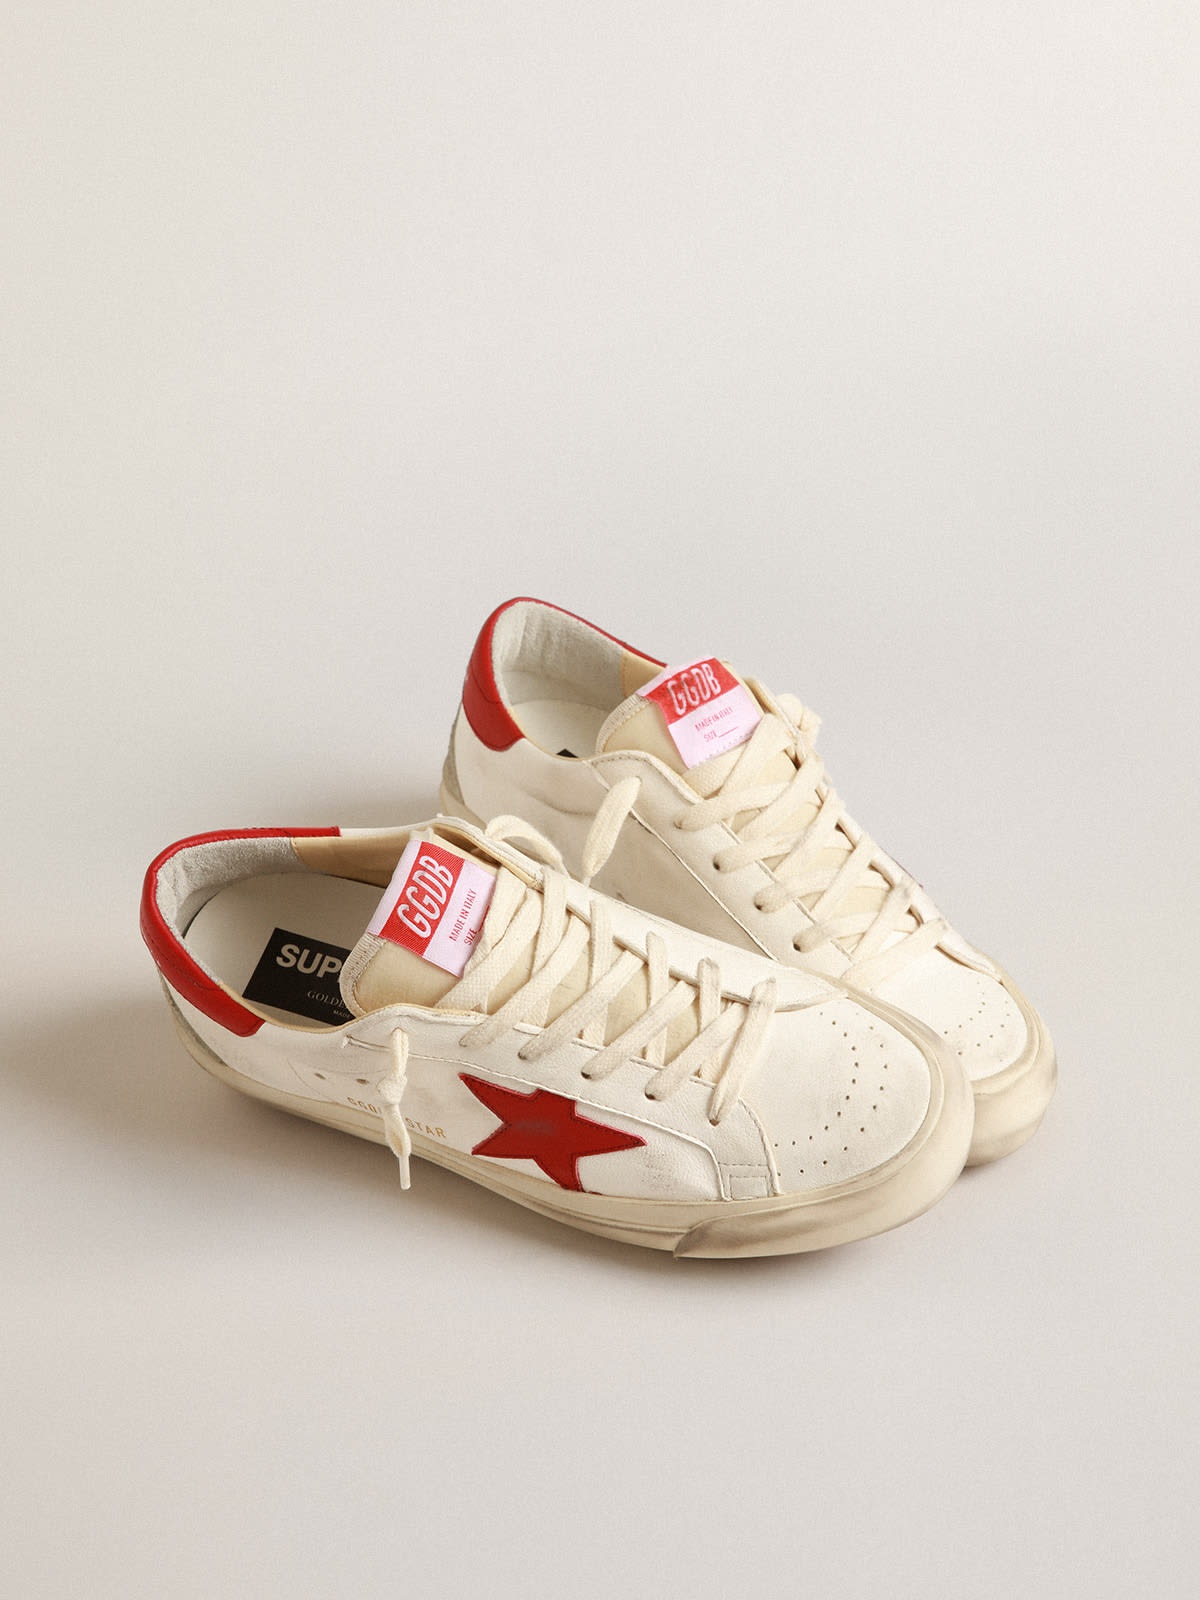 Men’s Super-Star LTD in nappa leather with red star and heel tab - 2